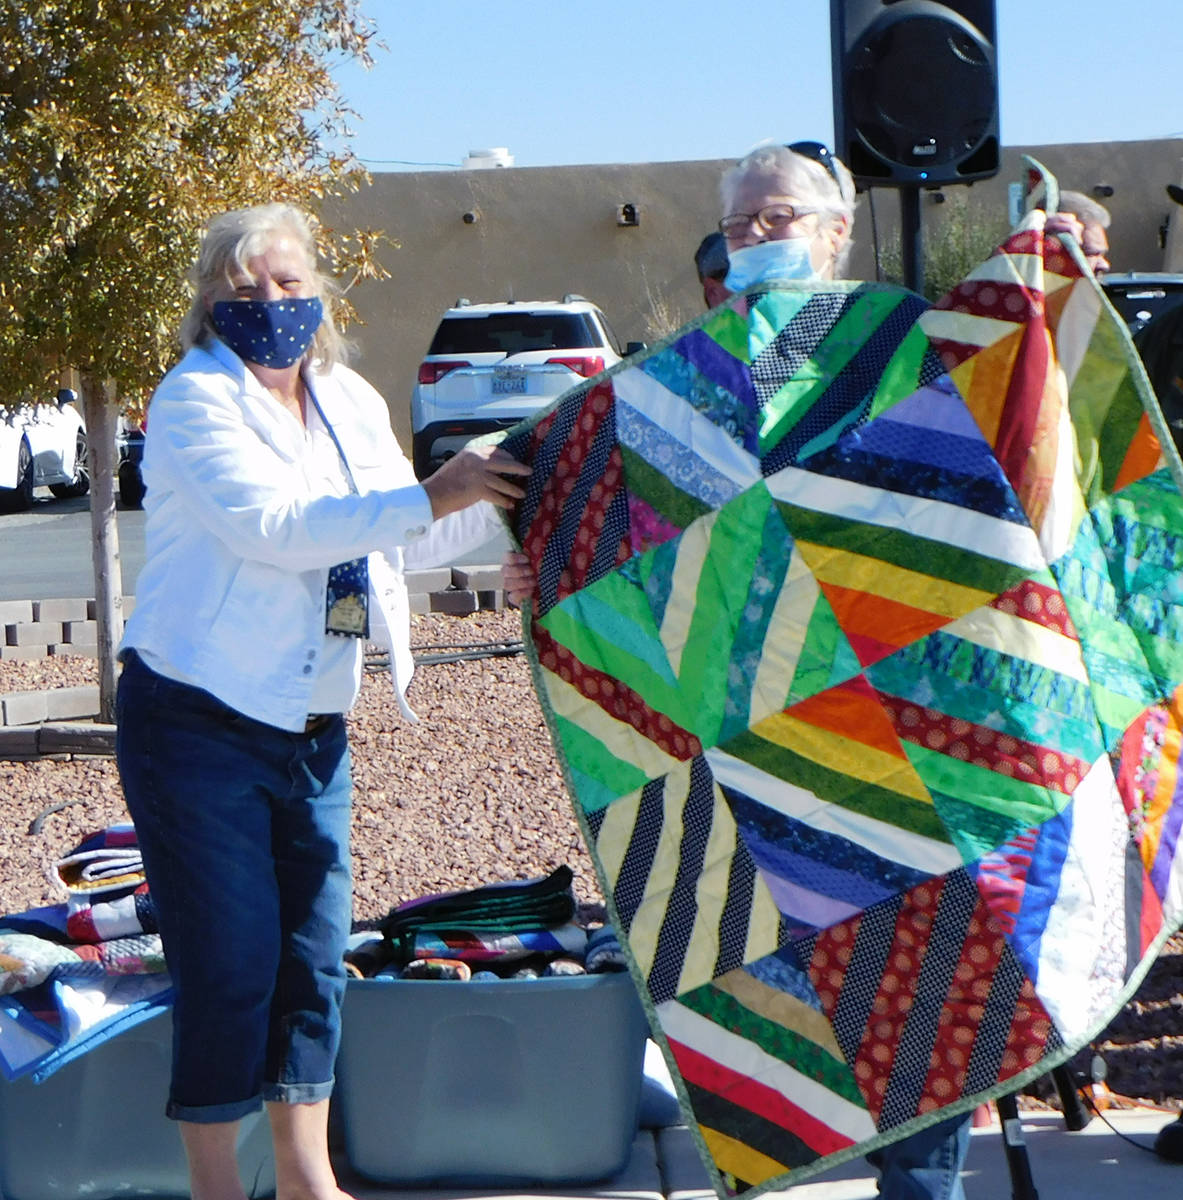 Robin Hebrock/Pahrump Valley Times Following the VFW's Veterans Day ceremony, the Shadow Mounta ...